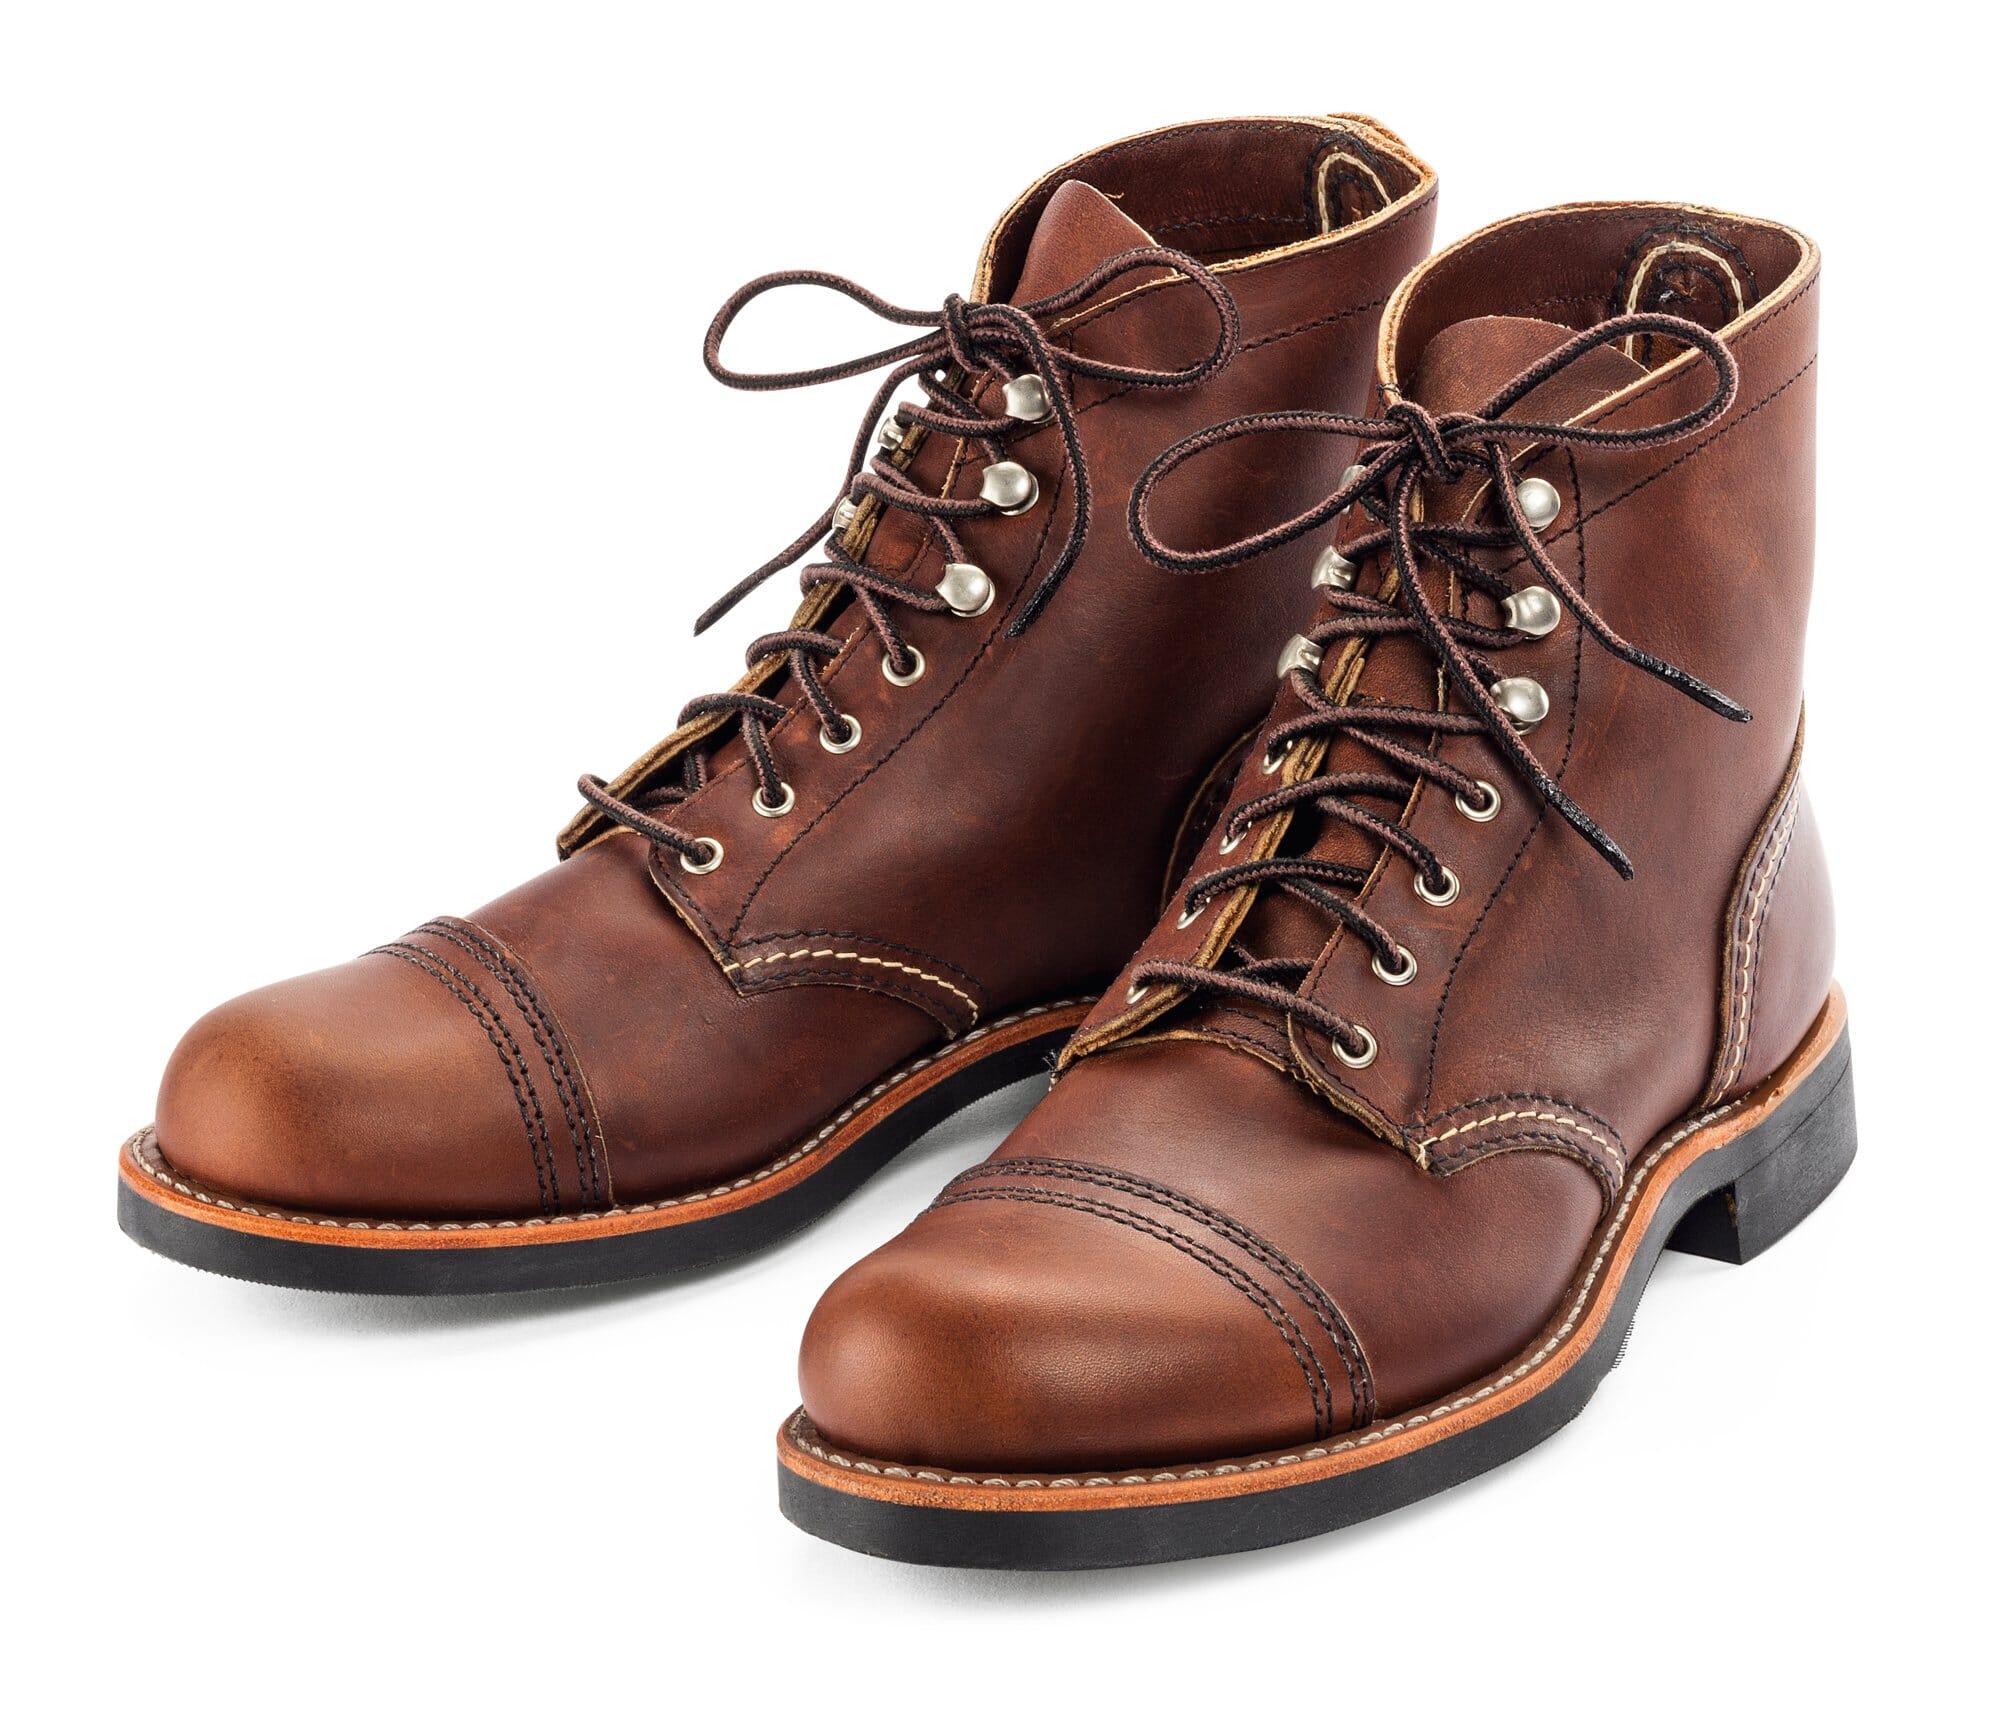 Buy > red wing office shoes > in stock